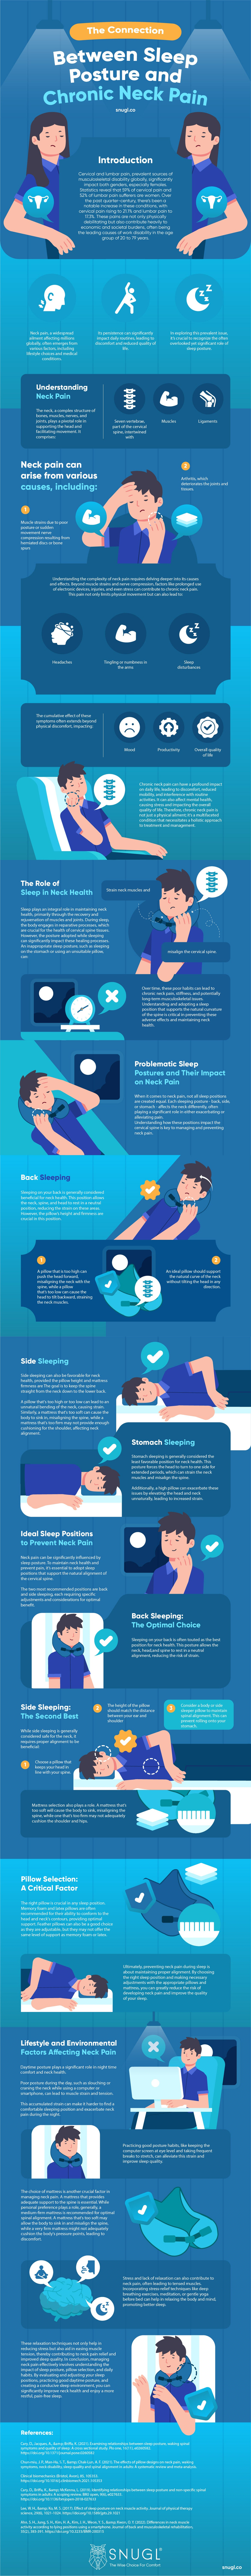 THE CRUCIAL LINK: SLEEP POSTURE AND CHRONIC NECK PAIN